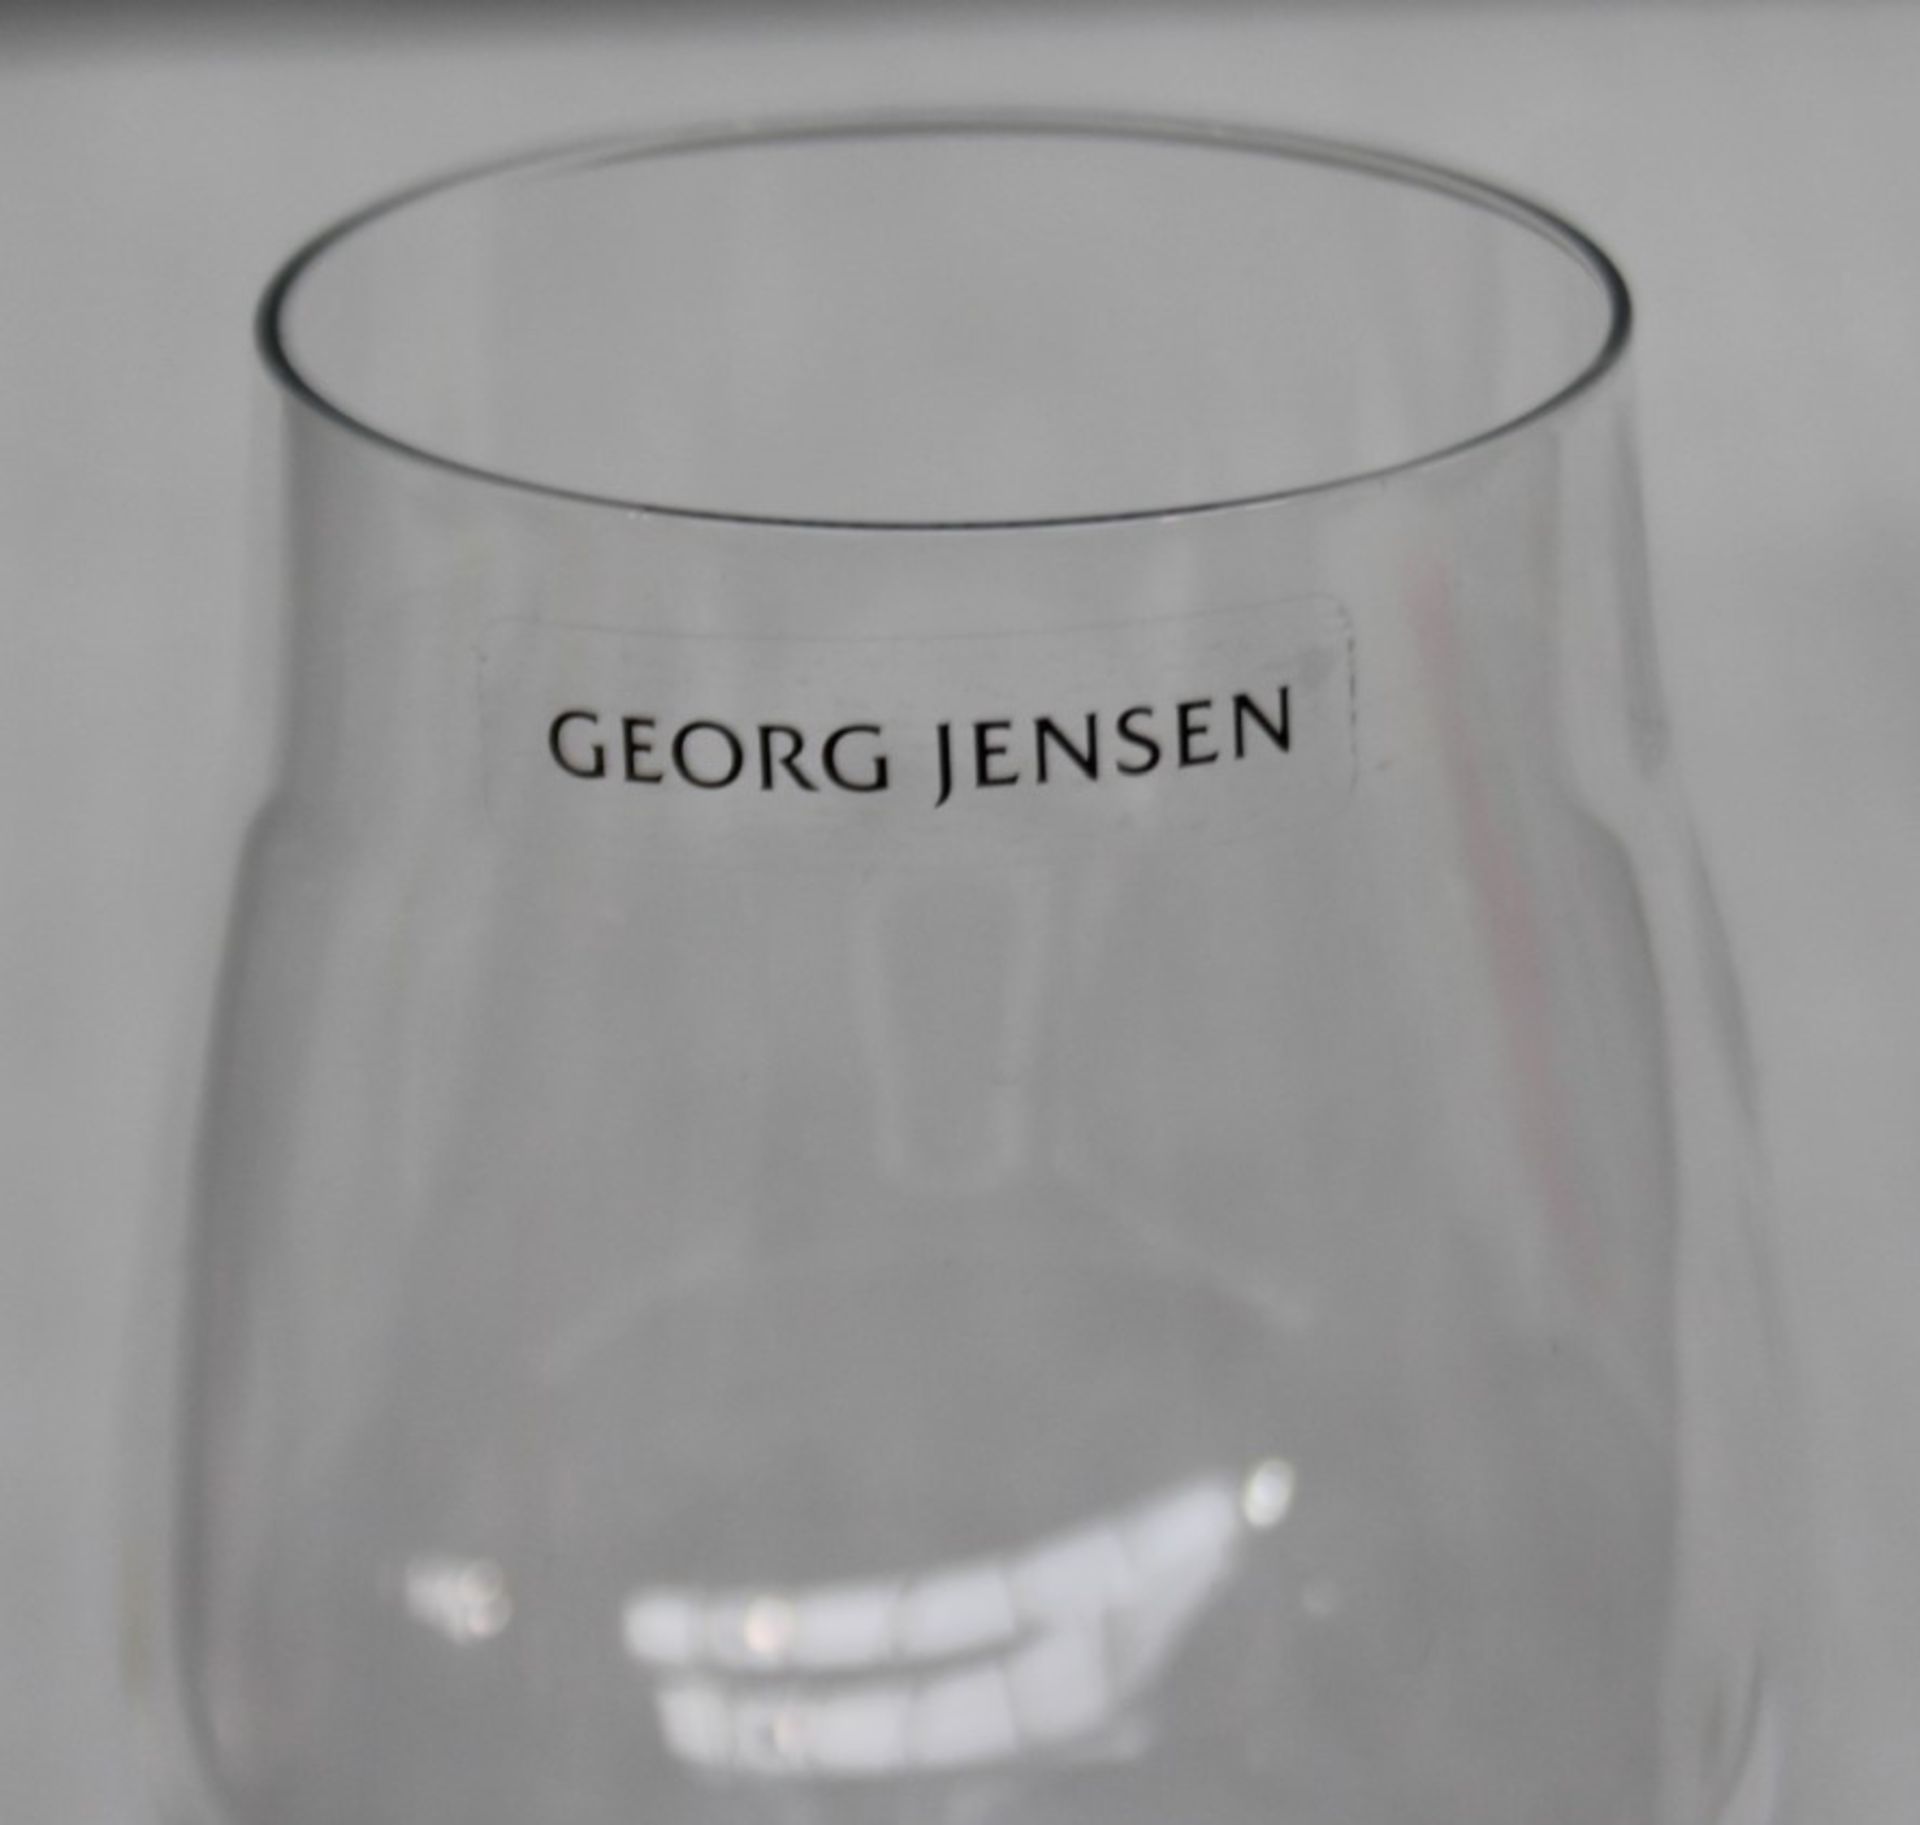 5 x GEORG JENSEN 'Sky' Crystal White Wine Glass - Ref: 6864831/HAS2157/WH2-C5/02-23-1 - CL987 - - Image 6 of 8